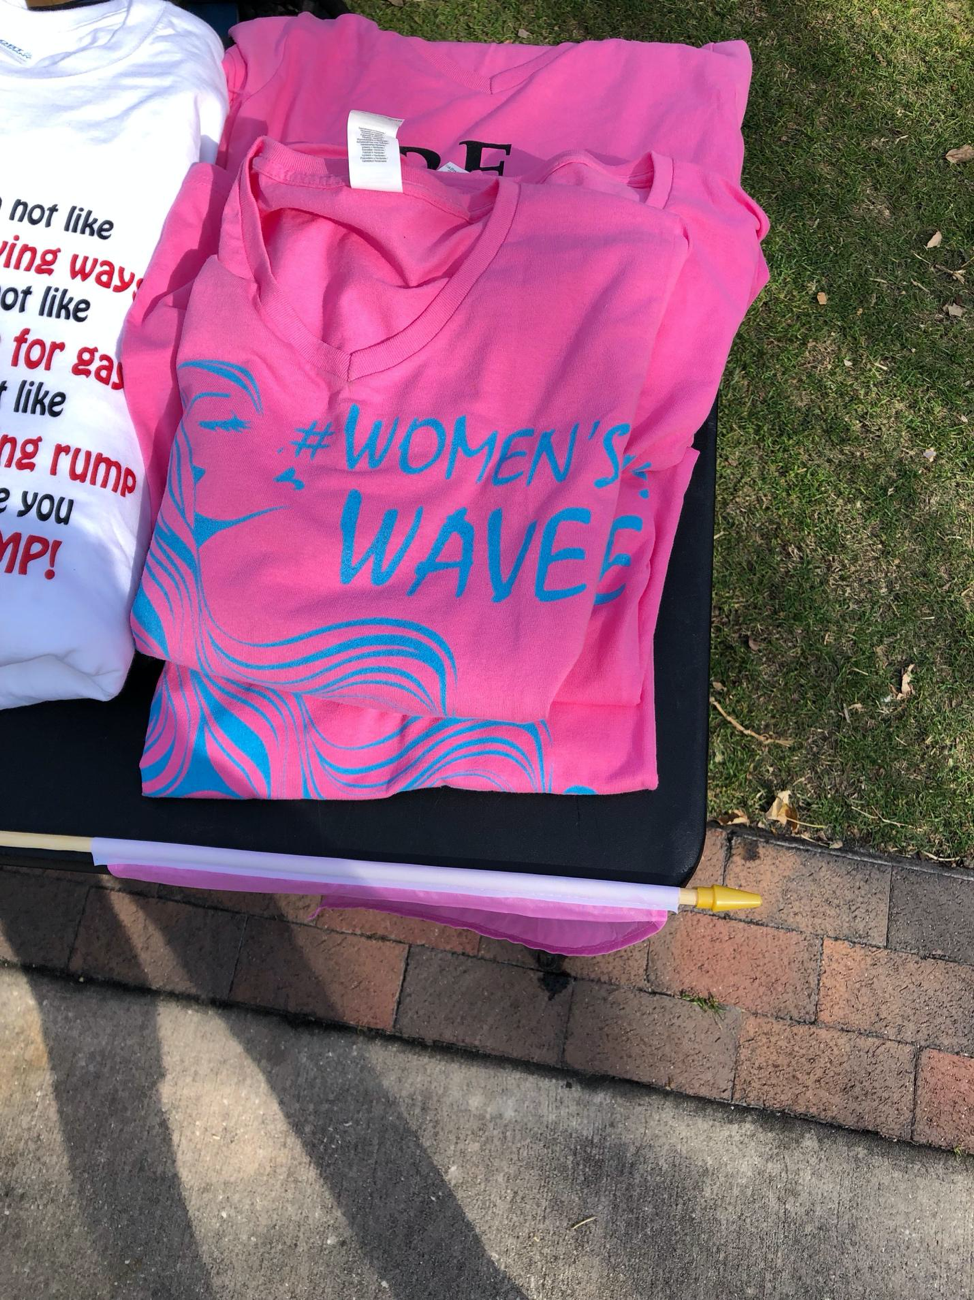 Figure 3. Image showing #womenswave appearing on merchandise (t-shirts) for sale at Lake Eola Park on Jan. 19, 2019.